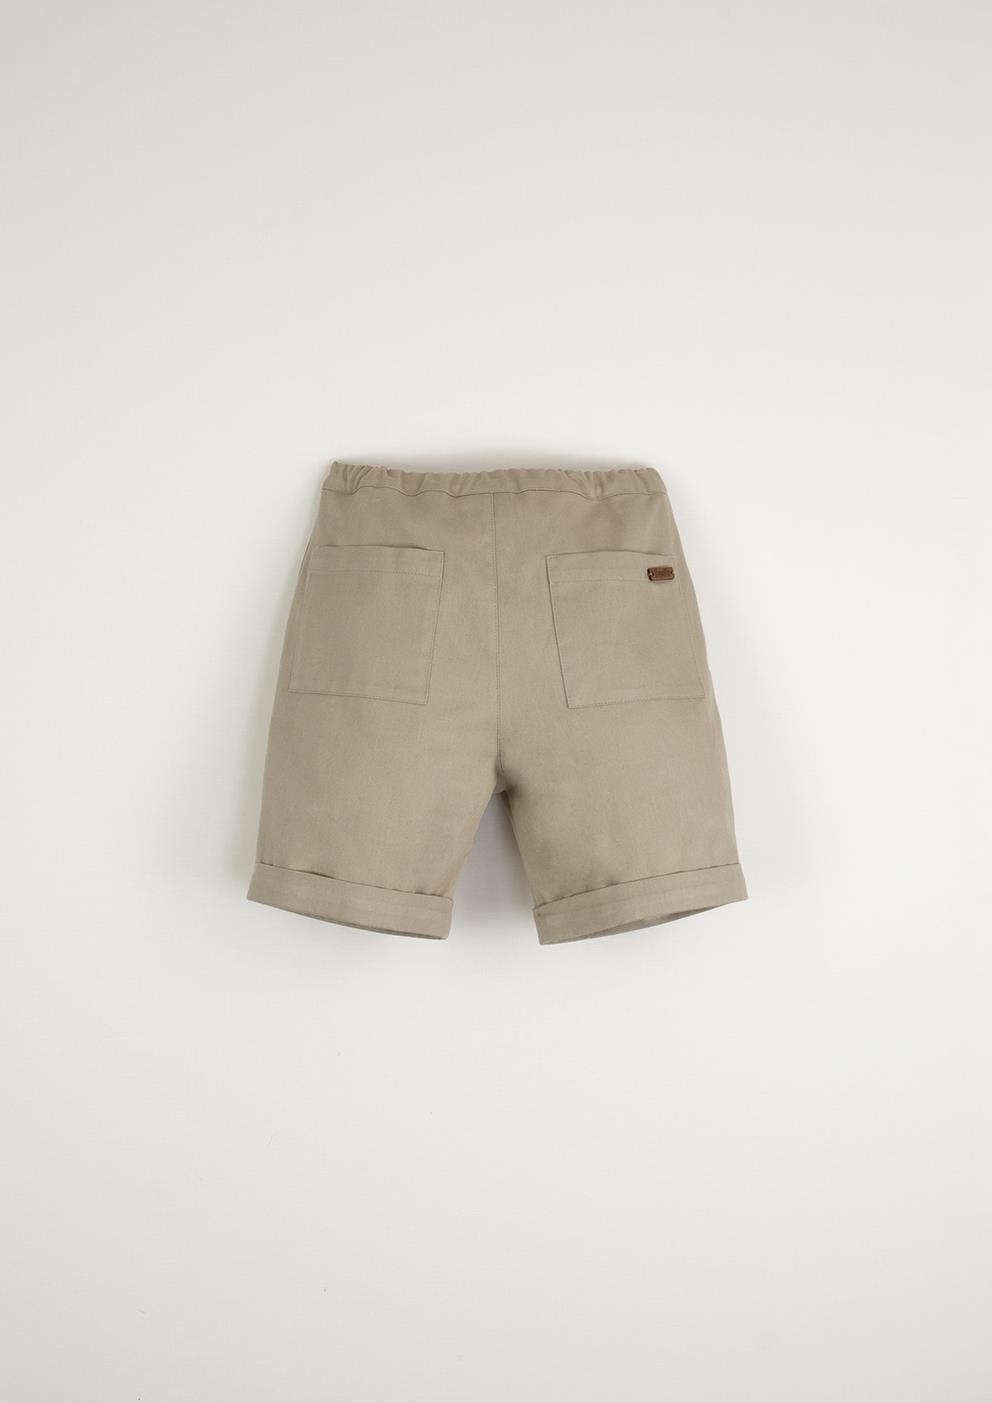 Mod.17.3 Beige shorts with darts | SS23 Mod.17.3 Beige shorts with darts